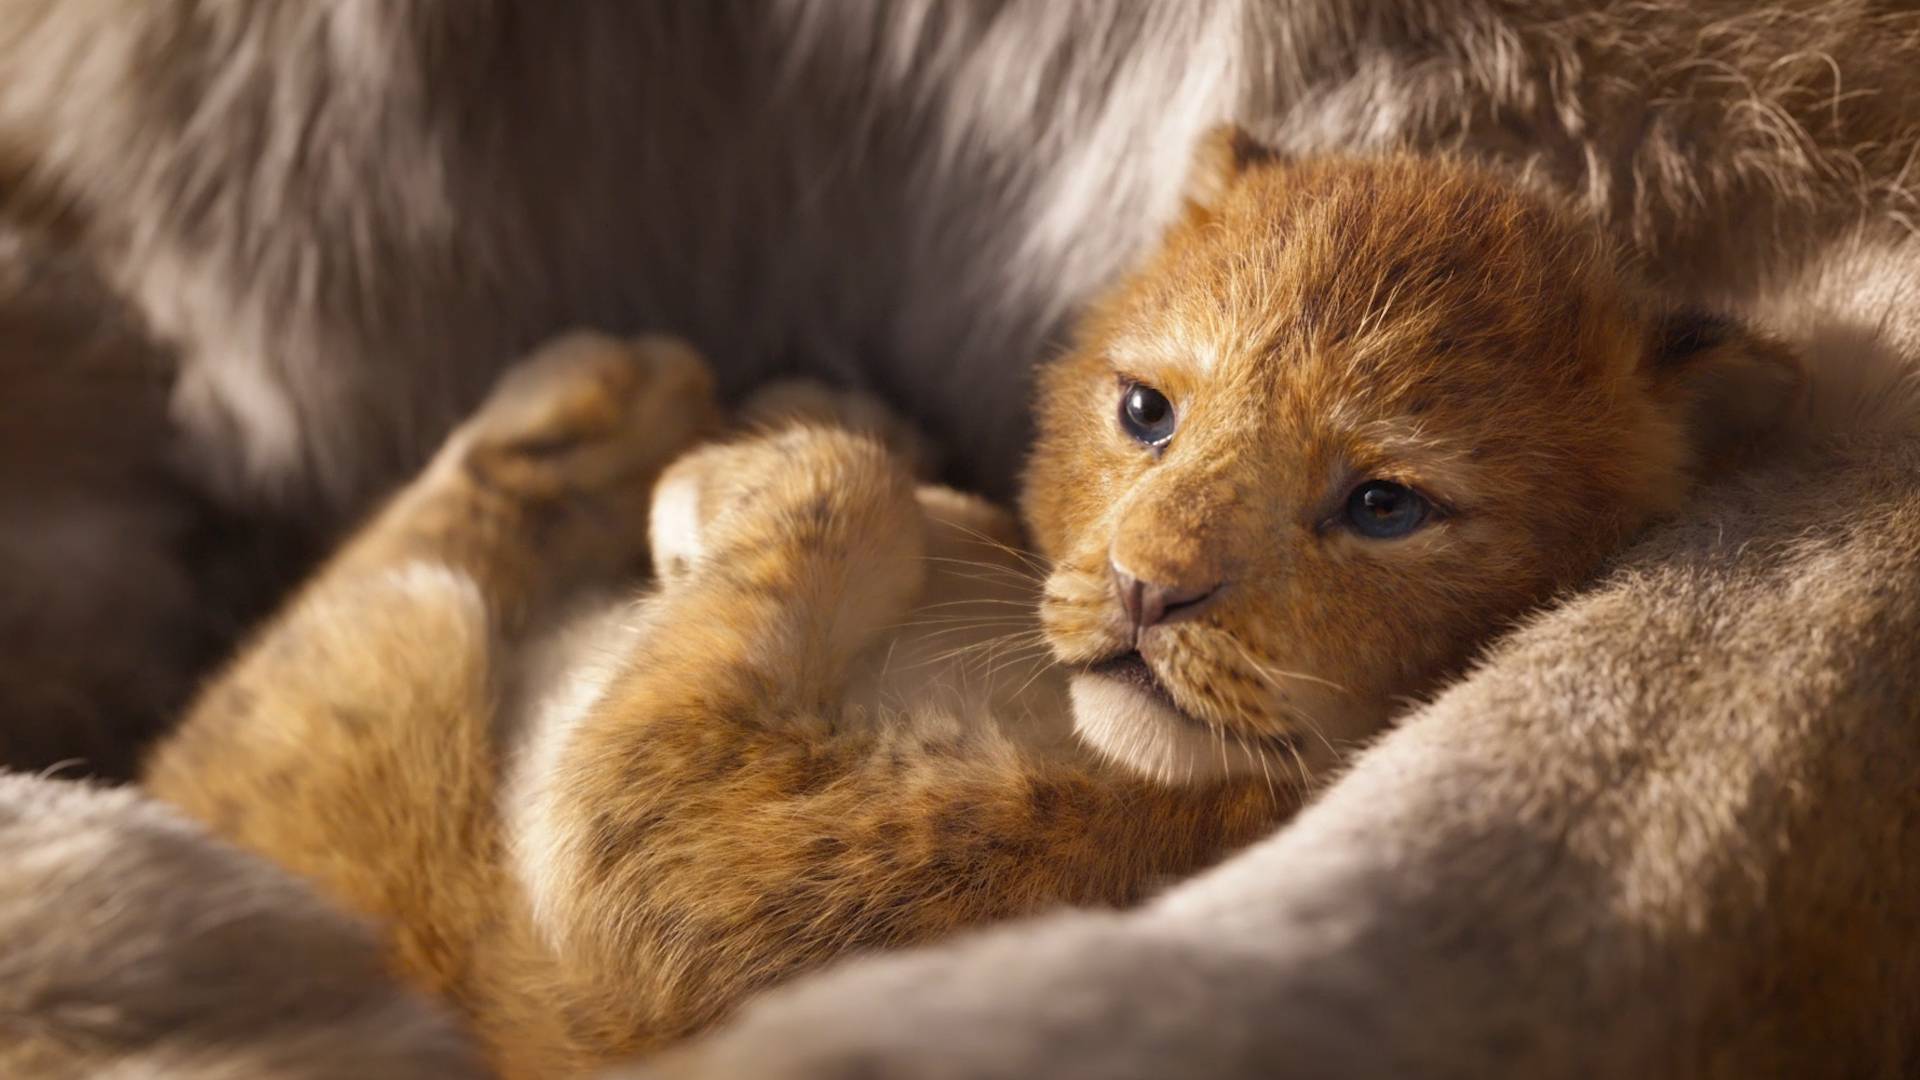 The Lion King (2019) Wallpapers